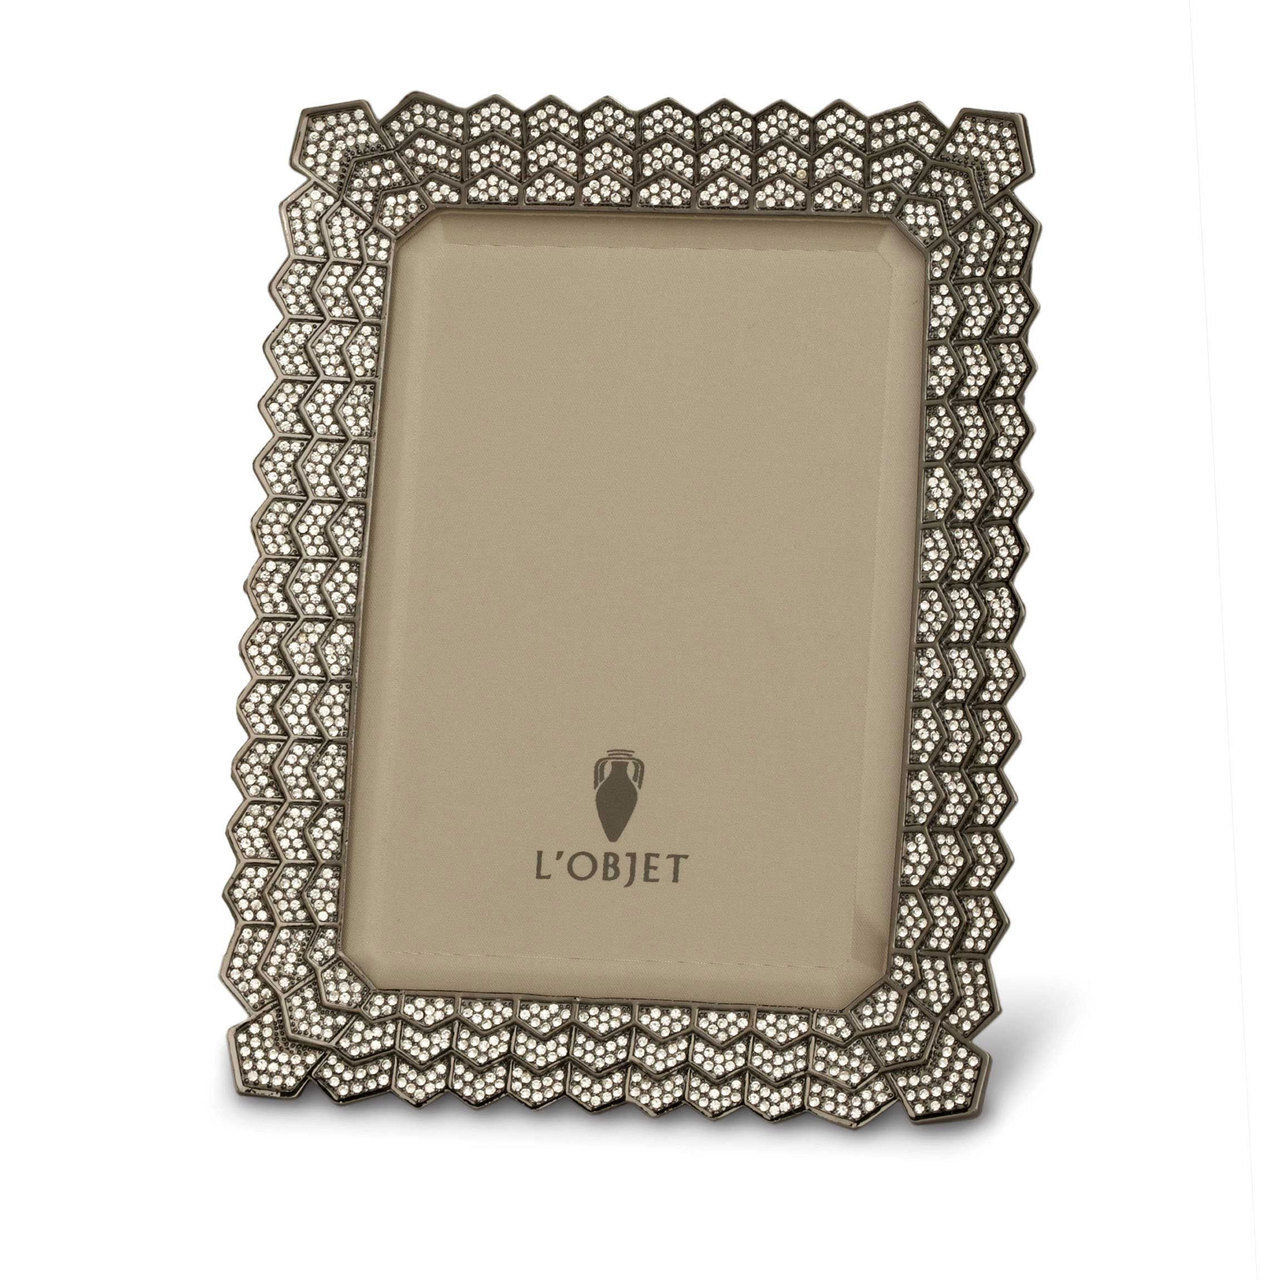 L'Objet Deco Noir 8 x 10 Inch Platinum with White Crystals Picture Frame